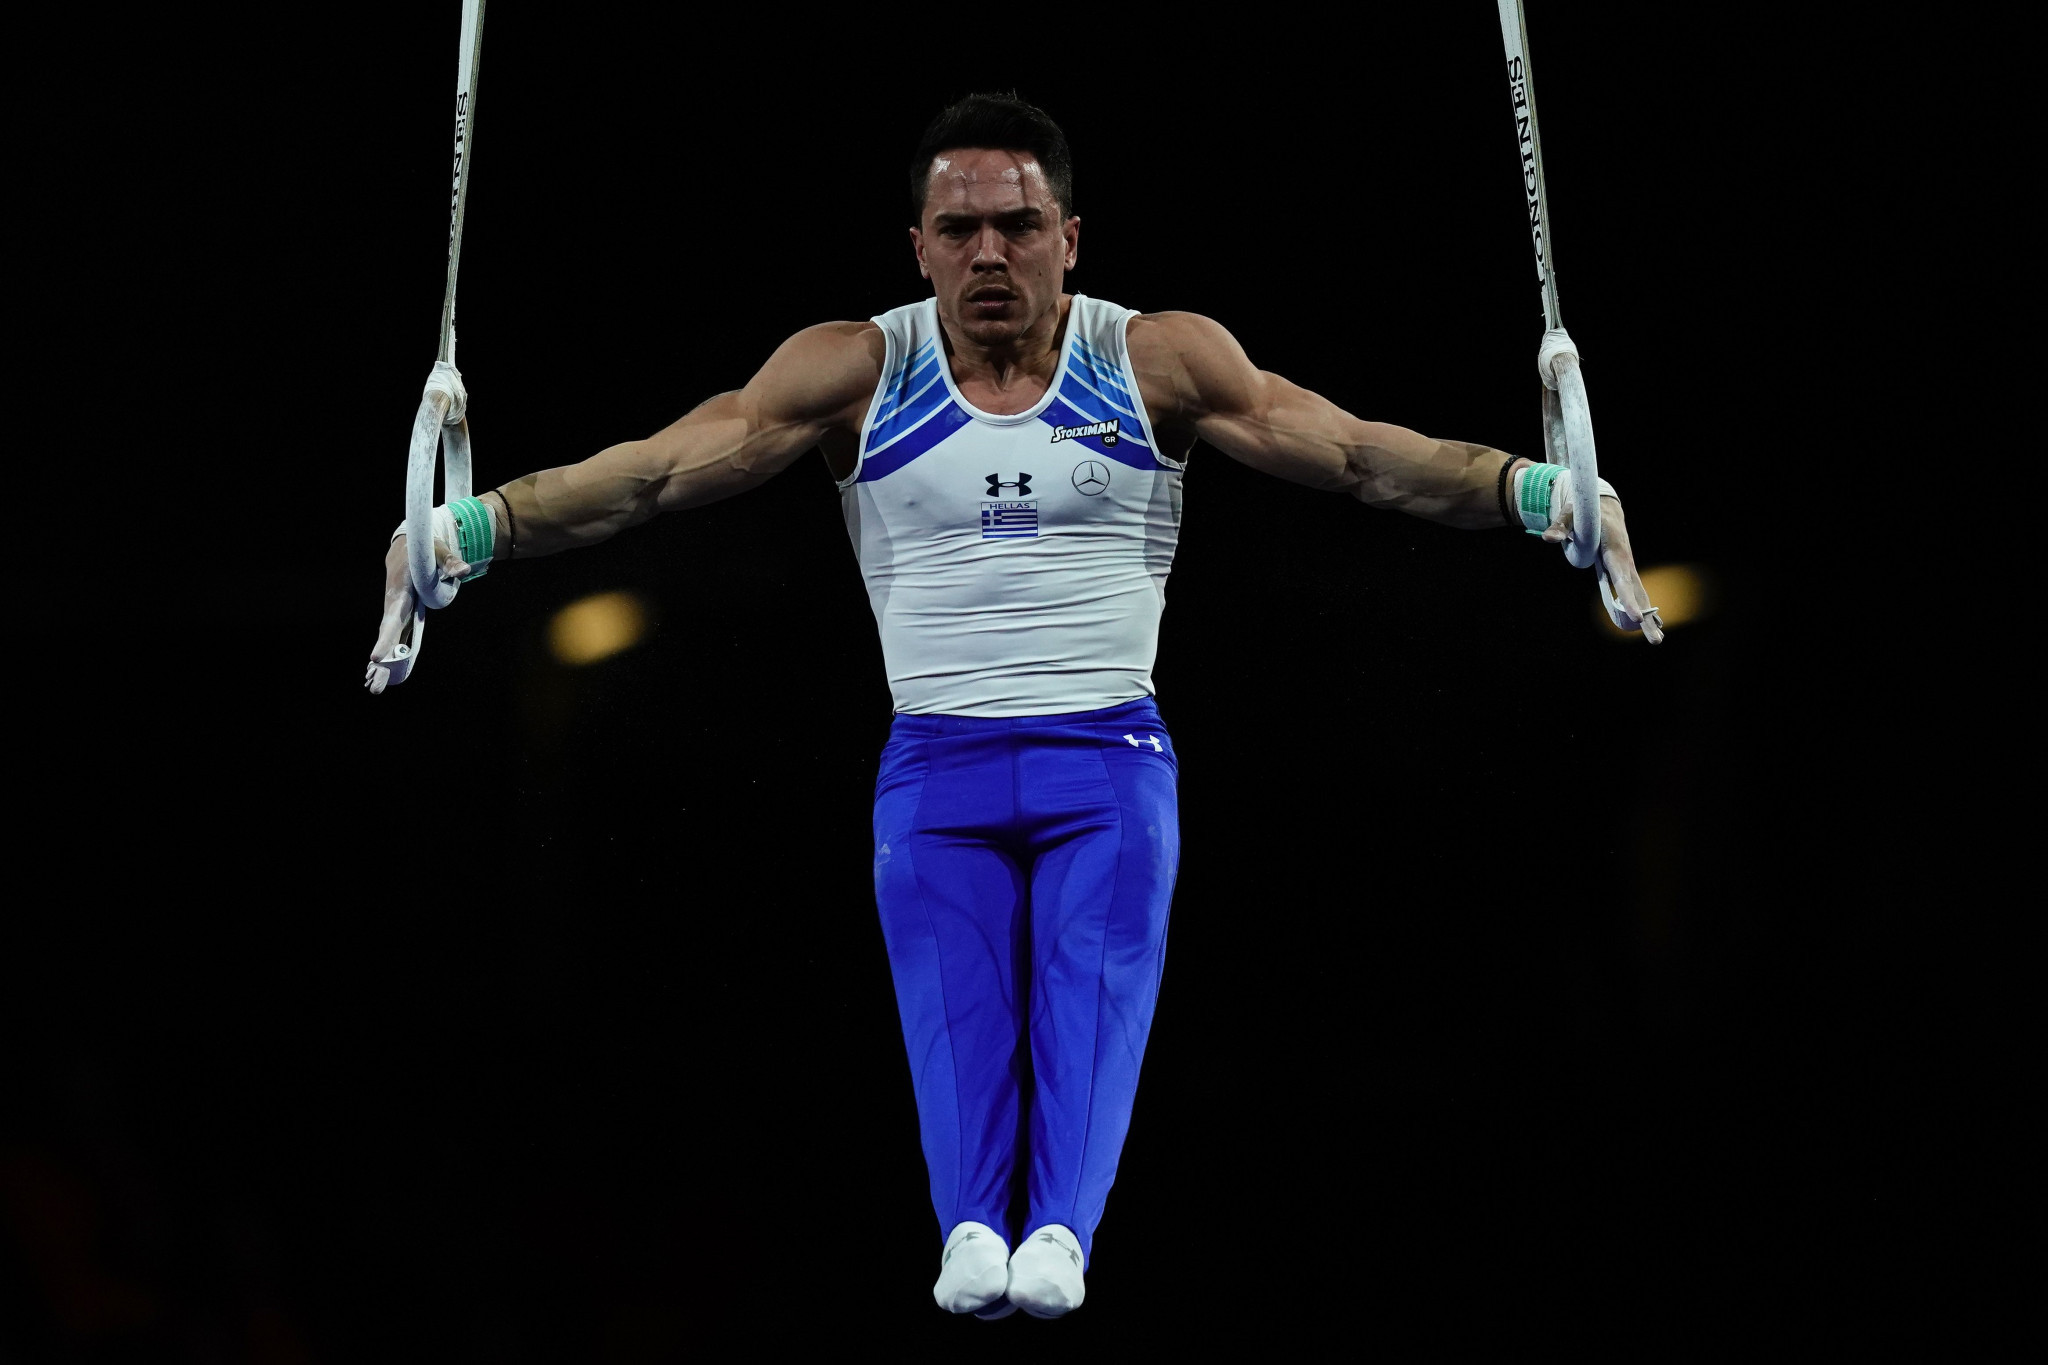 Greece's Olympic champion Eleftherios Petrounias topped rings qualification in Melbourne ©Getty Images